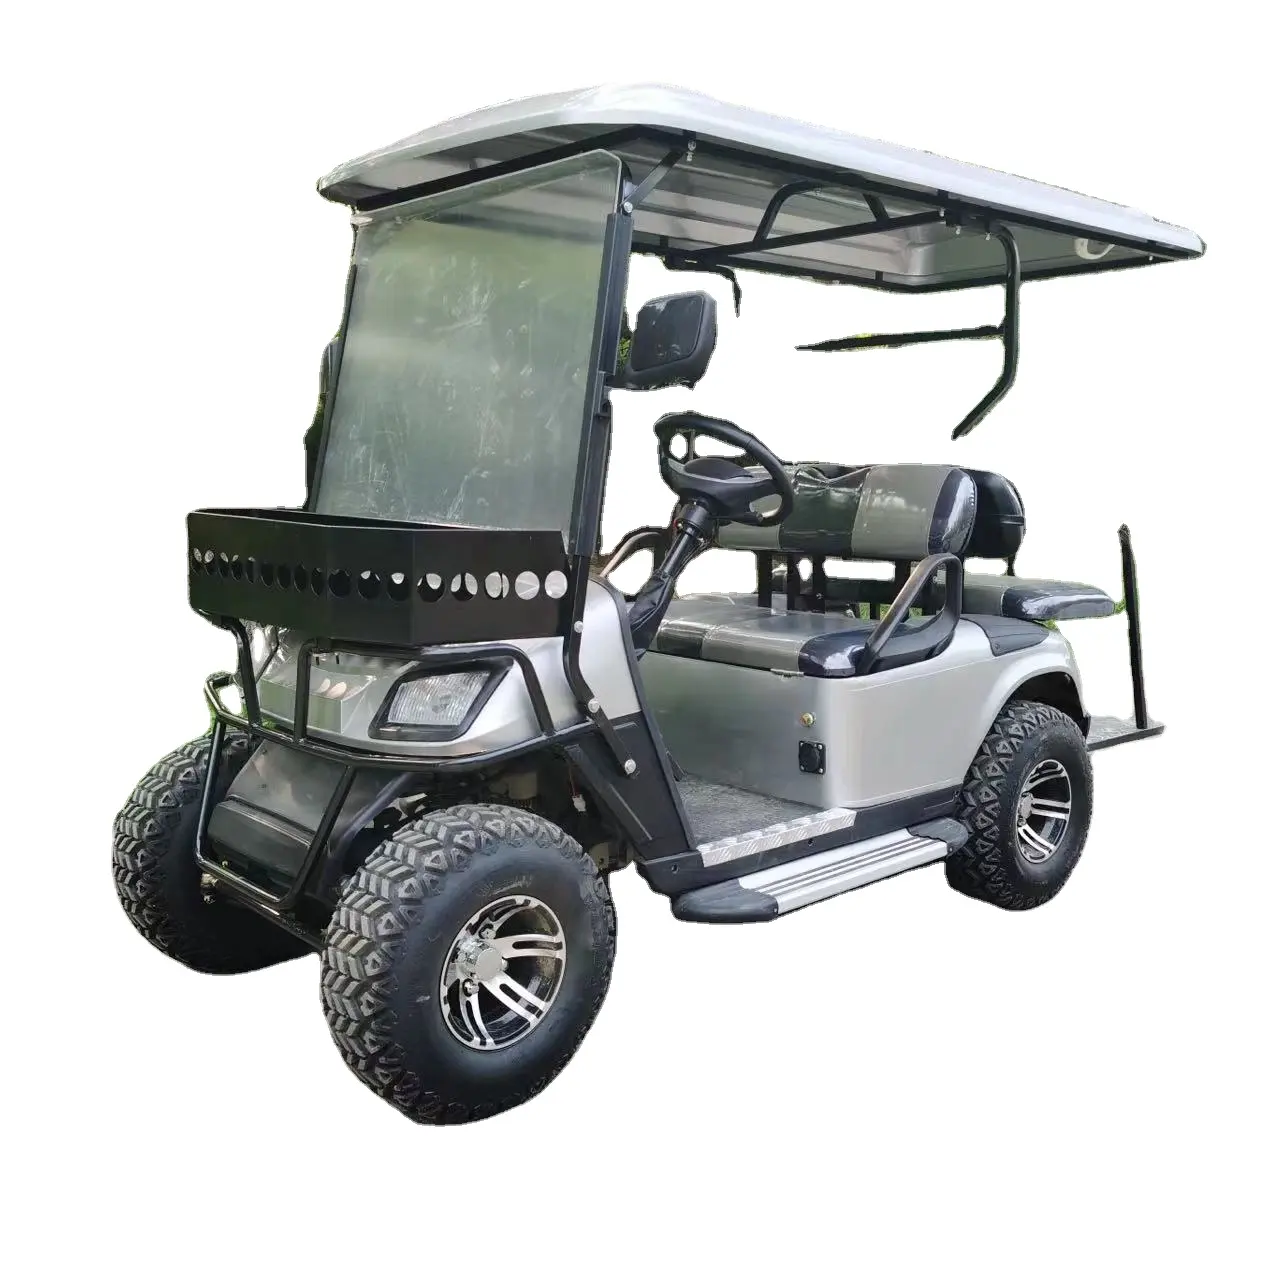 4seater golf cart Sharefer 4 seats 2+2 off road electric golf cart off road tires Optional front frame bumper